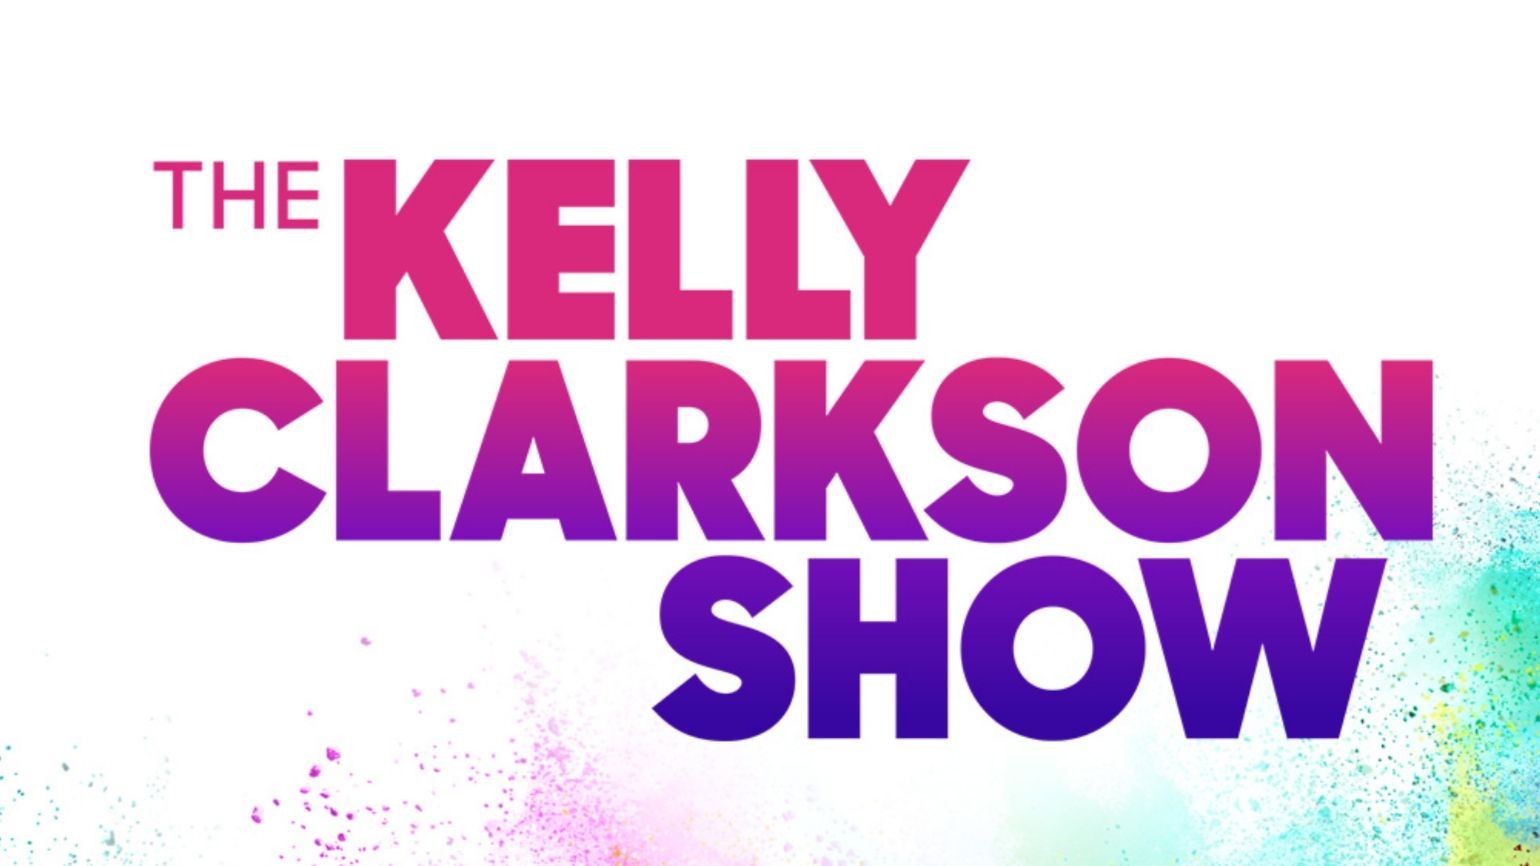 The Kelly Clarkson show poster